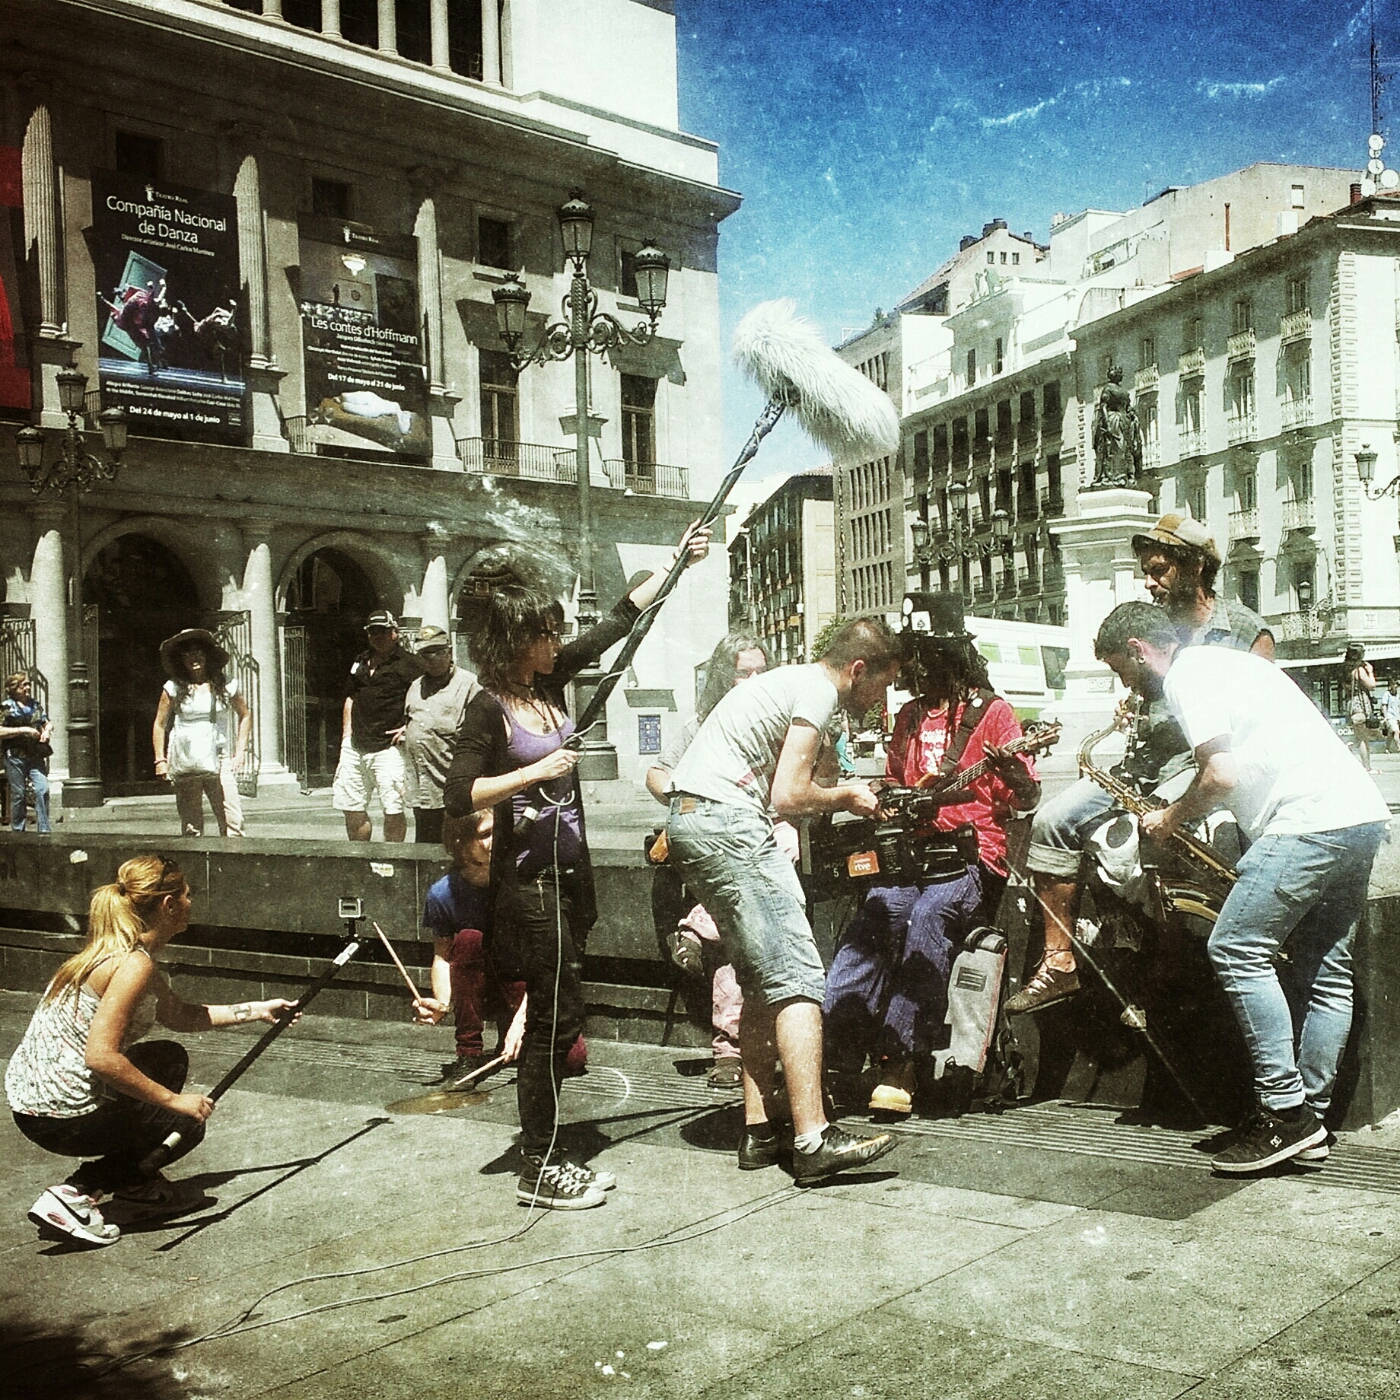 Close up : Street music video shooting in Madrid / image